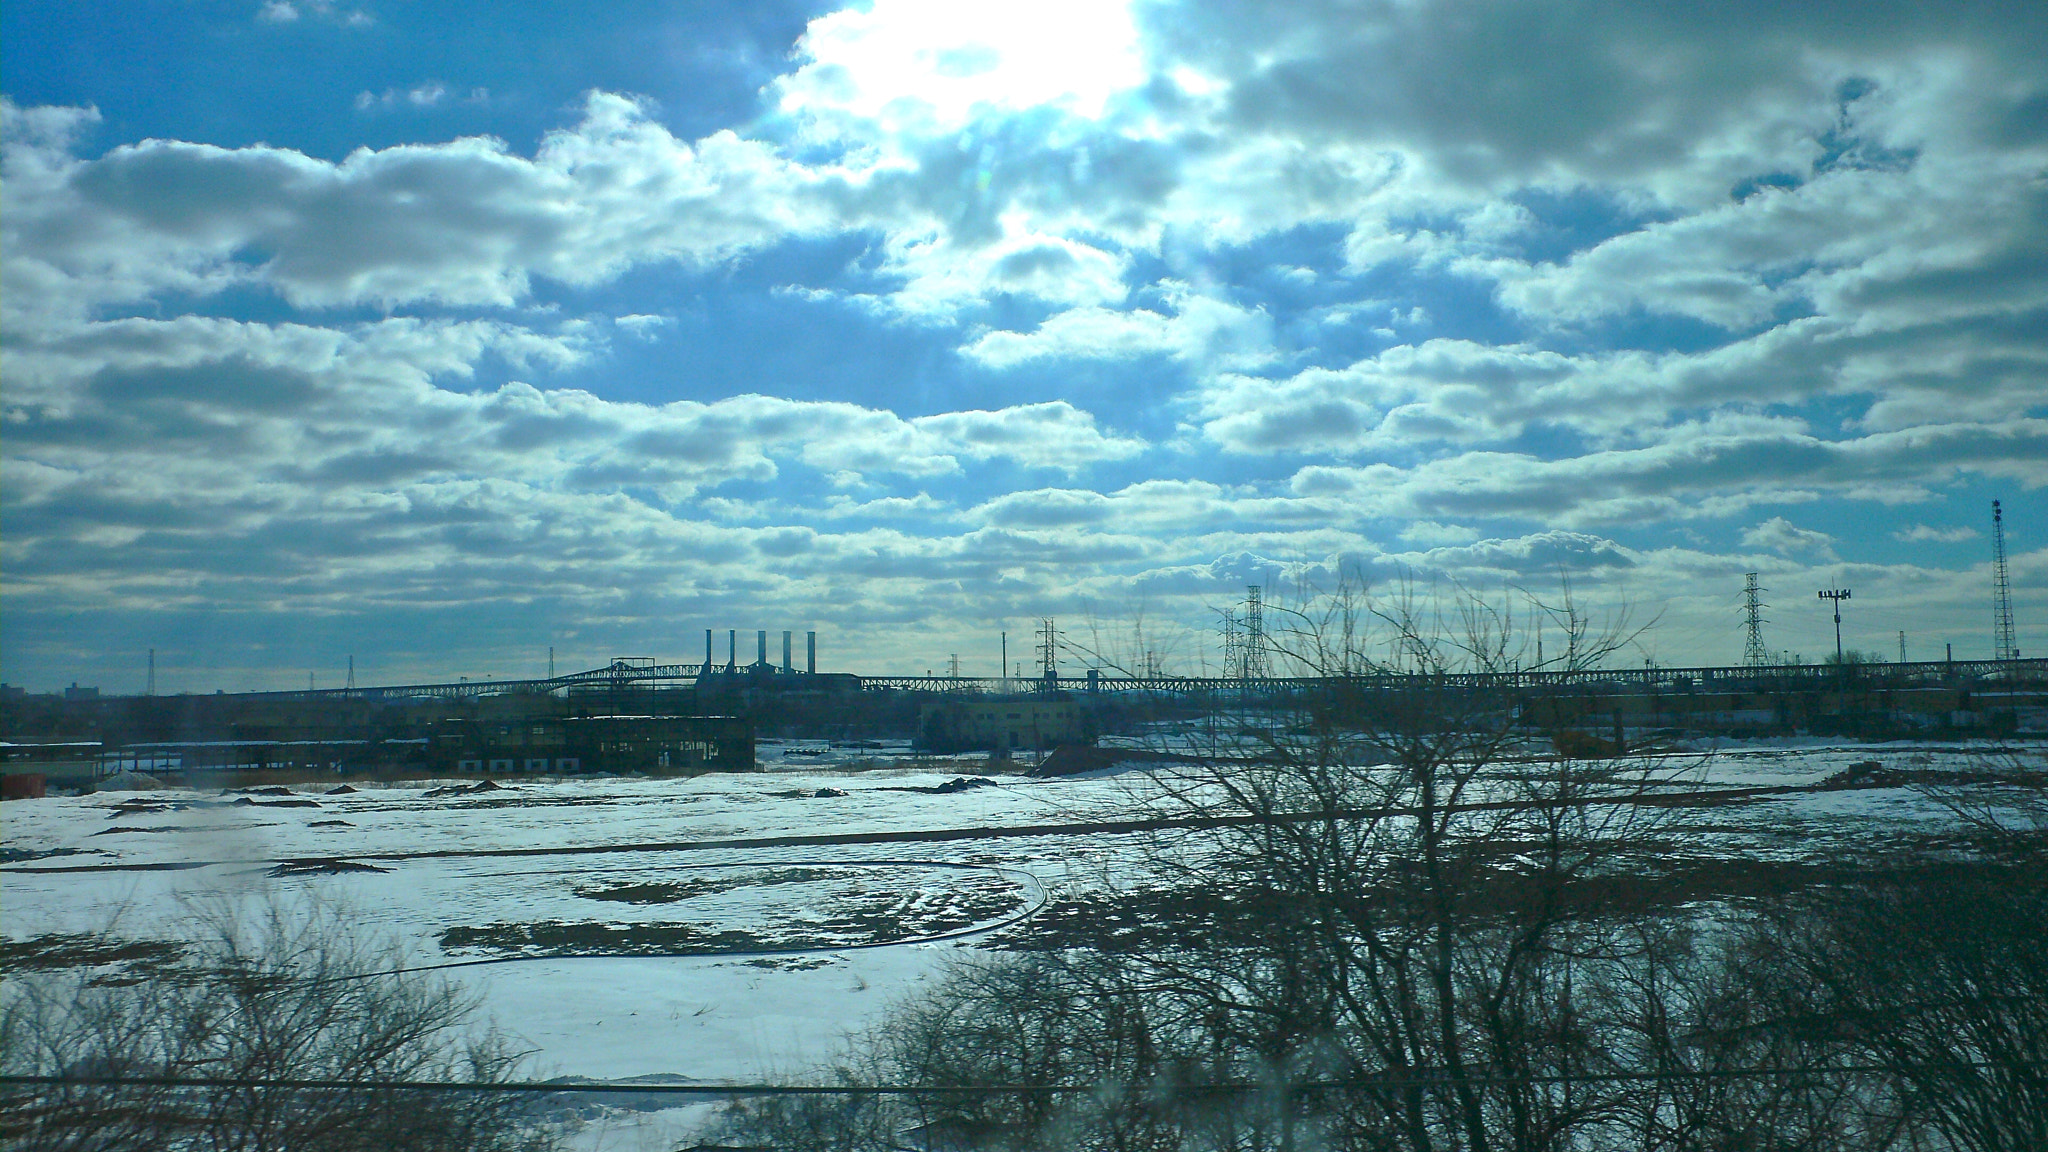 Panasonic DMC-LX1 sample photo. A cold day on the train from nyc to nj photography